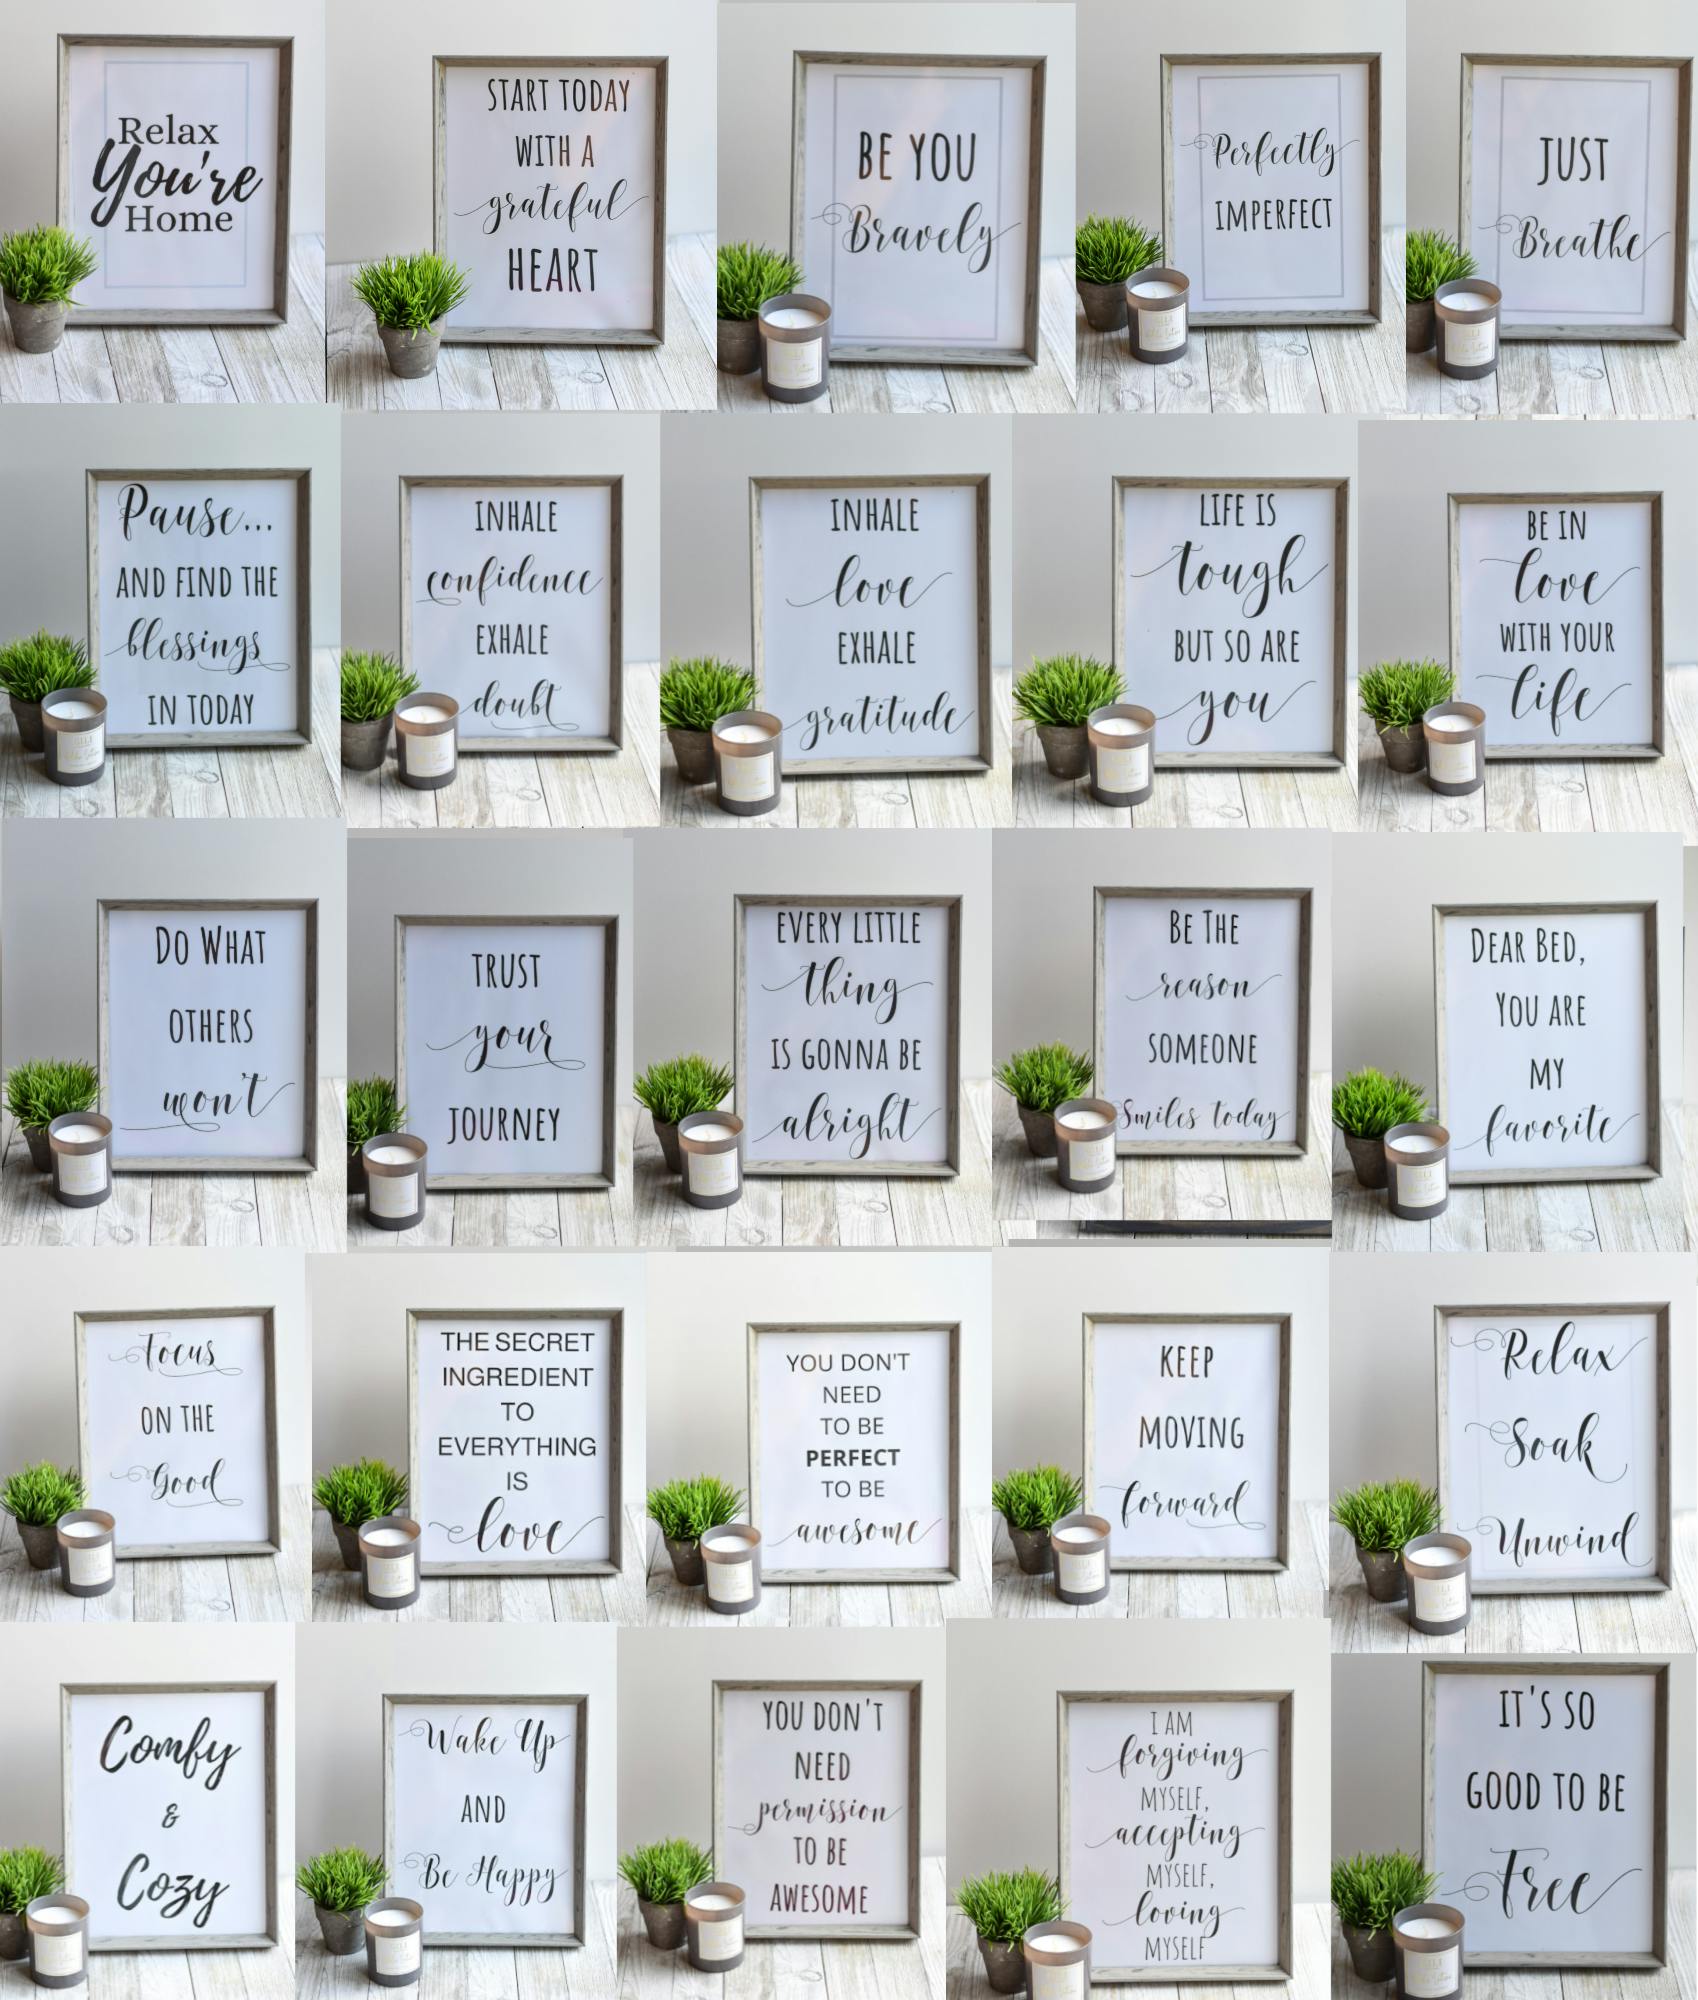 Printable Pack of 25 Inspirational Messages You Can Print and Frame - Easy Decor and Gift Idea